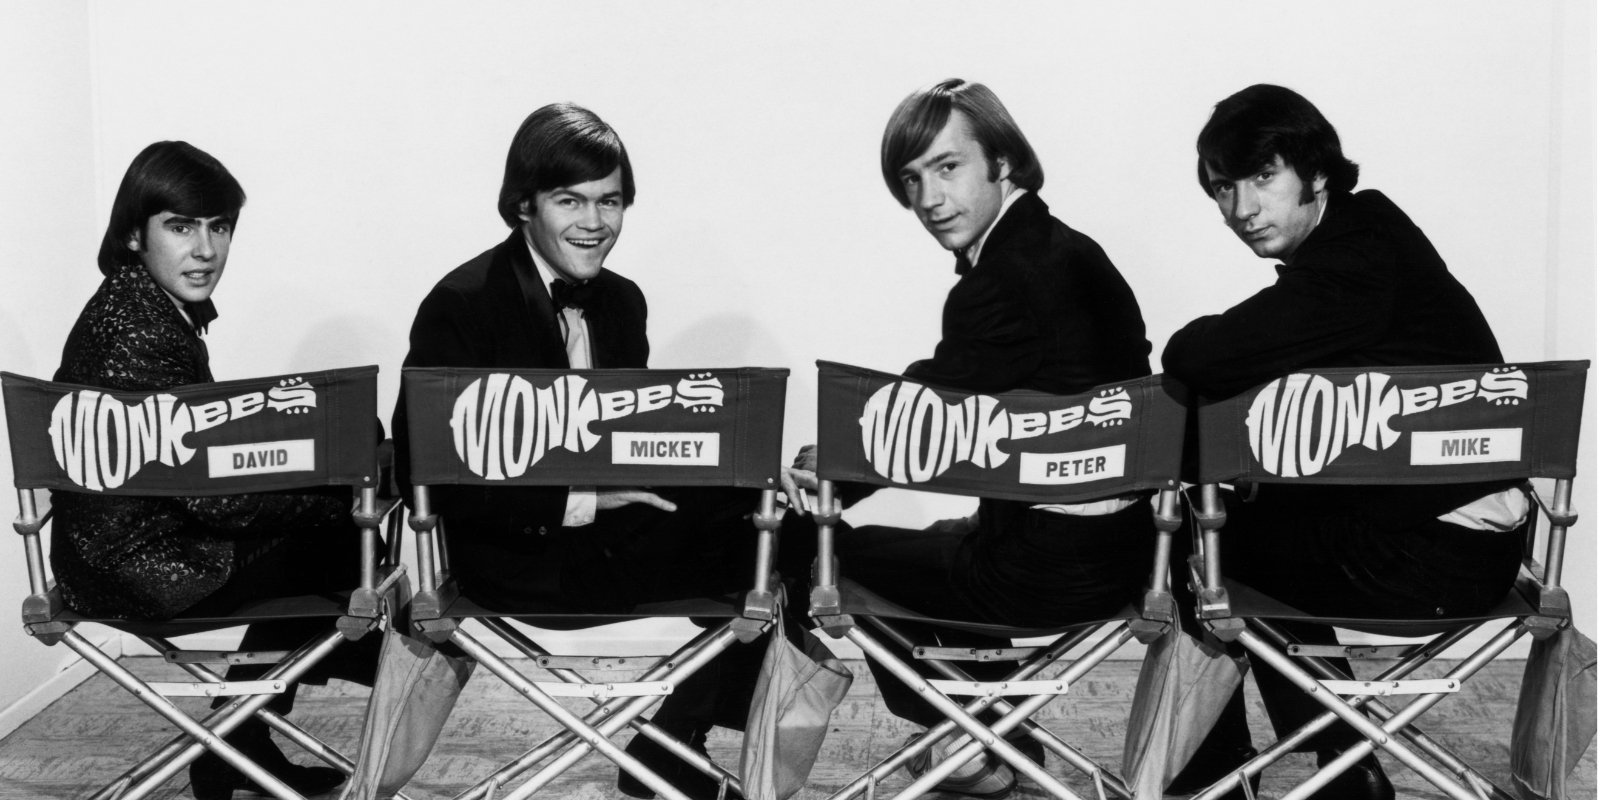 The Monkees Mike Nesmith Joked ‘Head’ Was Once So Edgy,’ and Now It’s ‘Mainstream’